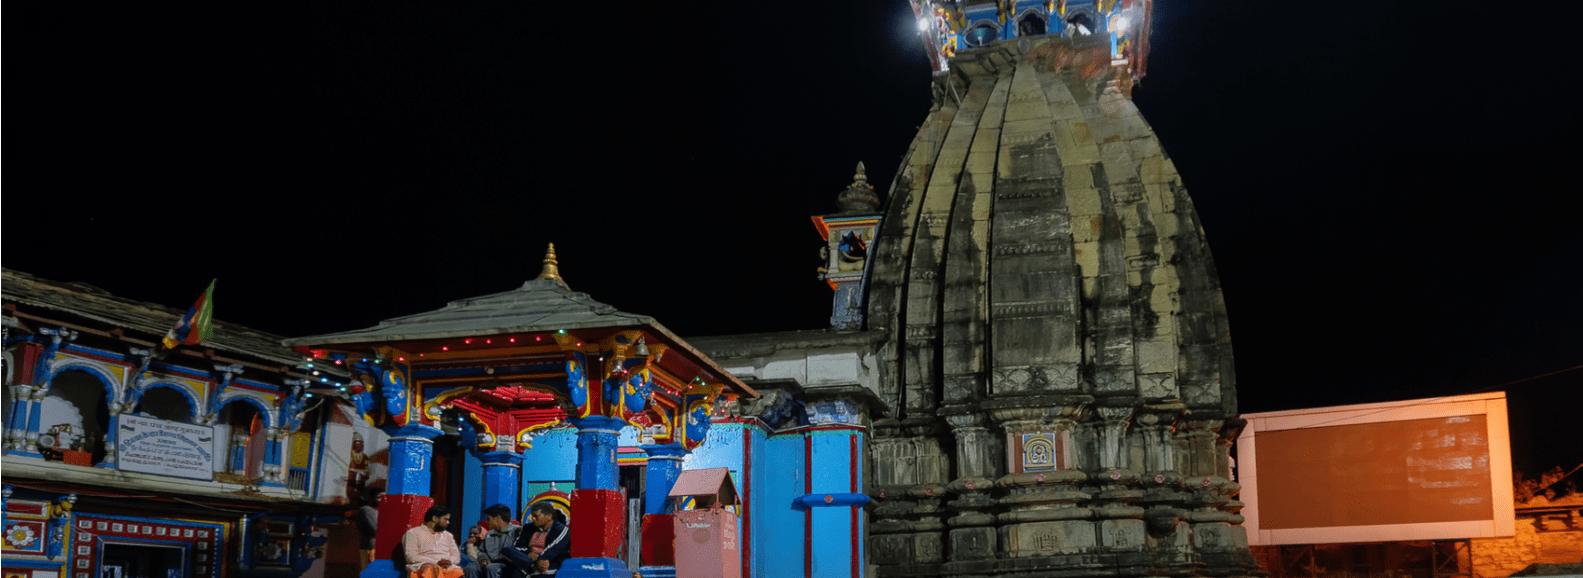 Omkareshwar temple in Ukhimath is the winter abode of deity of Kedarnath temple brought during Char Dham Yatra in winter